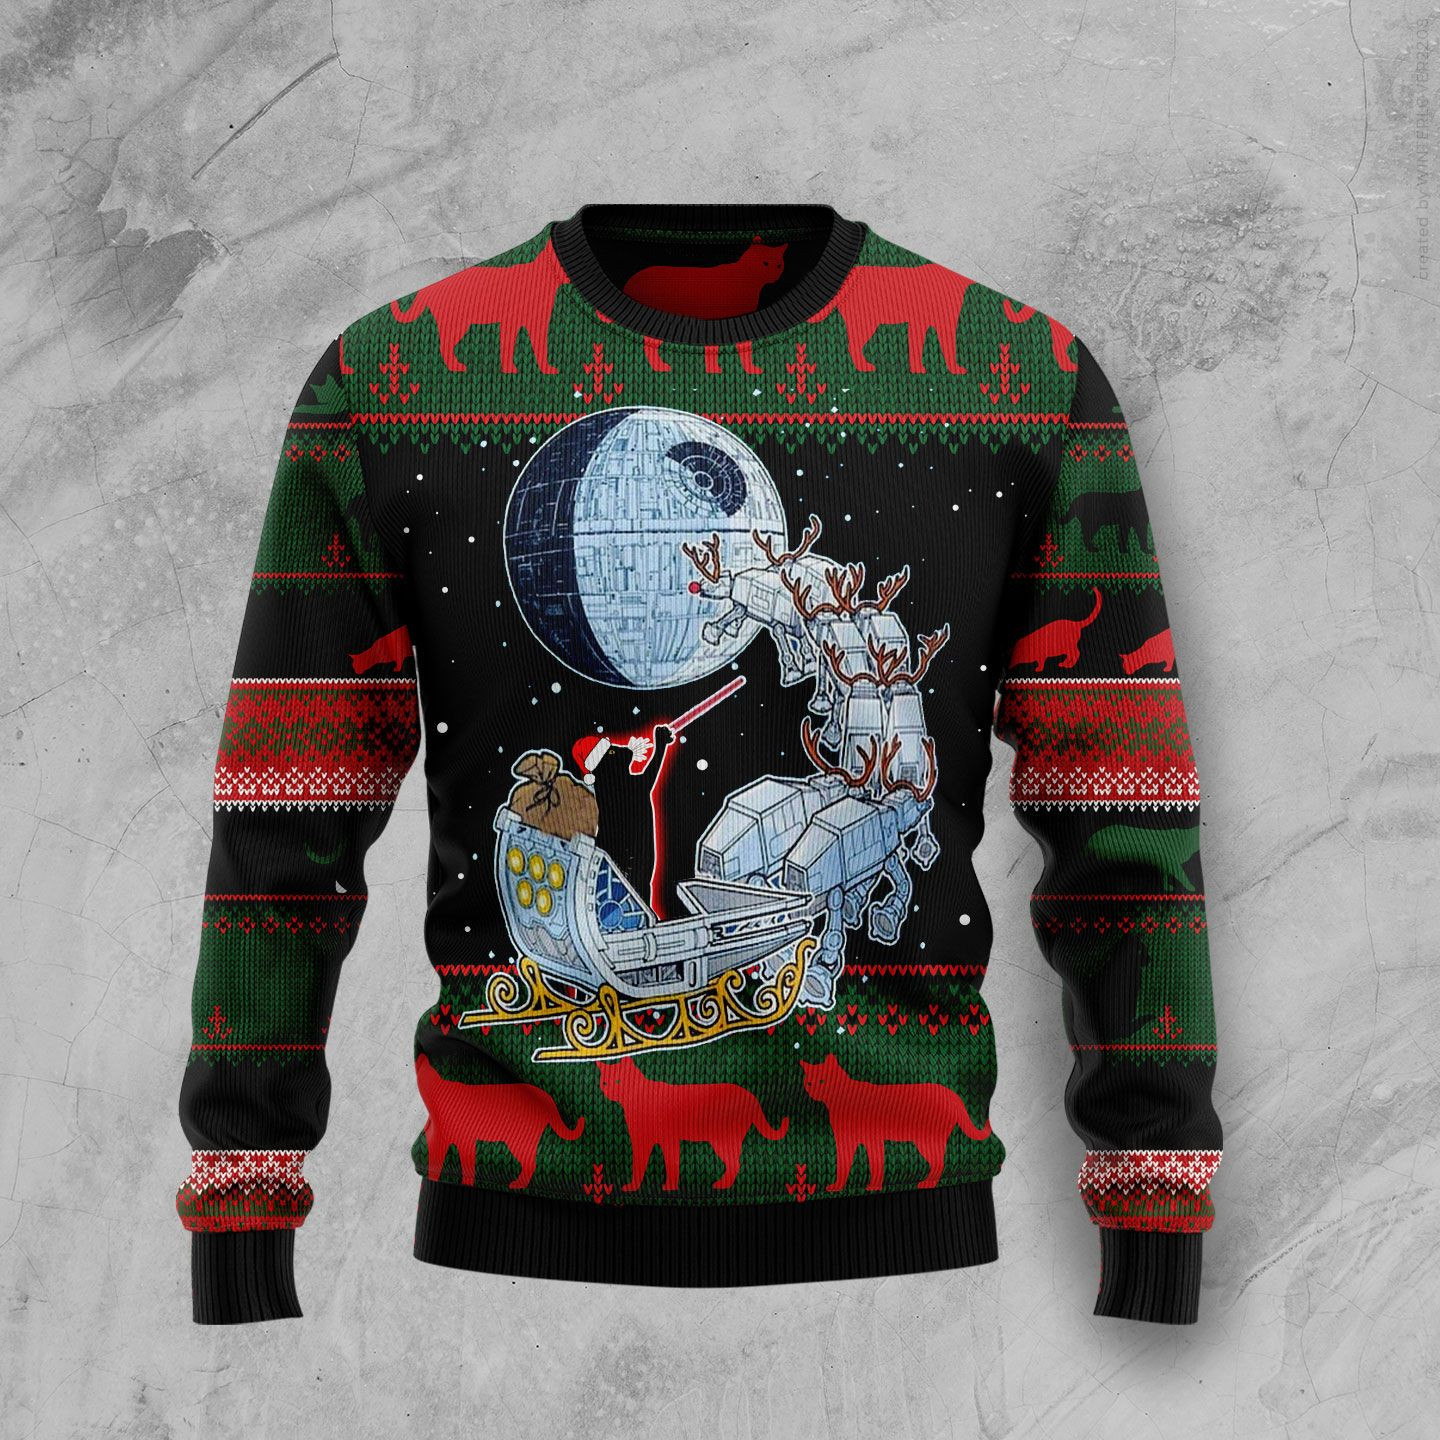 Black Cat Sleigh To Death Star Ugly Christmas Sweater, Ugly Sweater For Men Women, Holiday Sweater